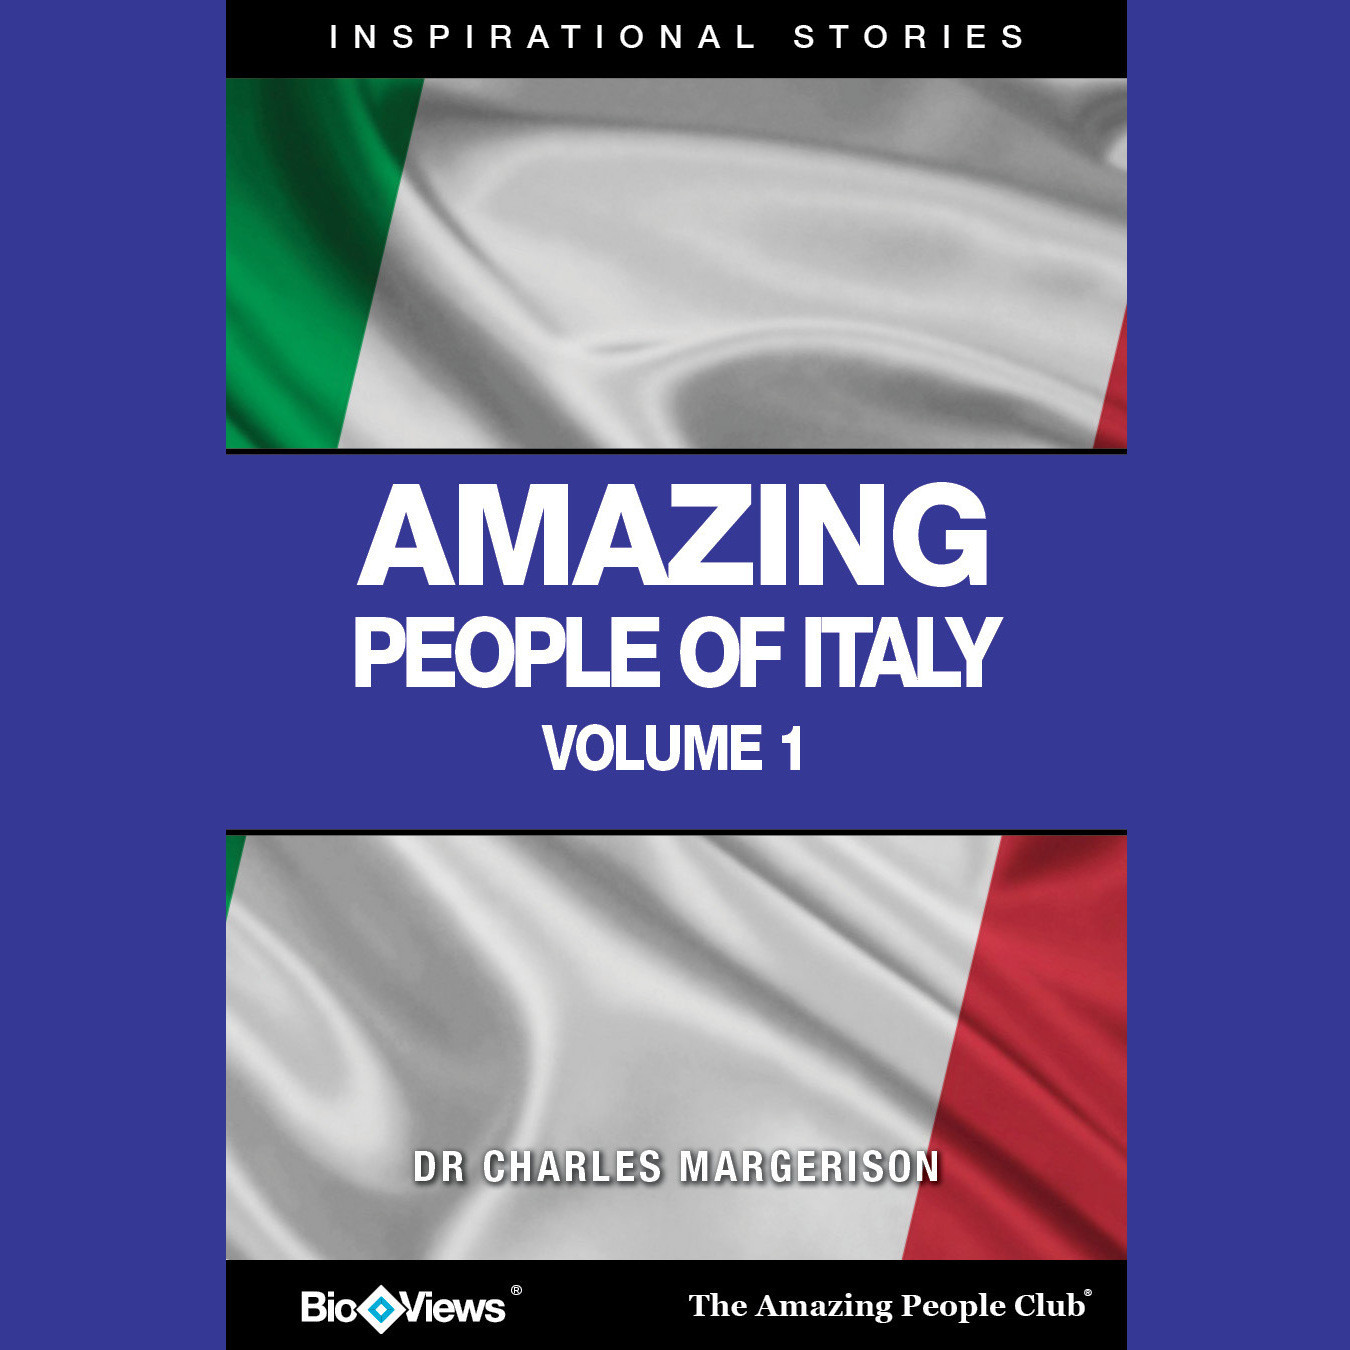 Amazing People of Italy, Vol. 1: Inspirational Stories Audiobook, by Charles Margerison